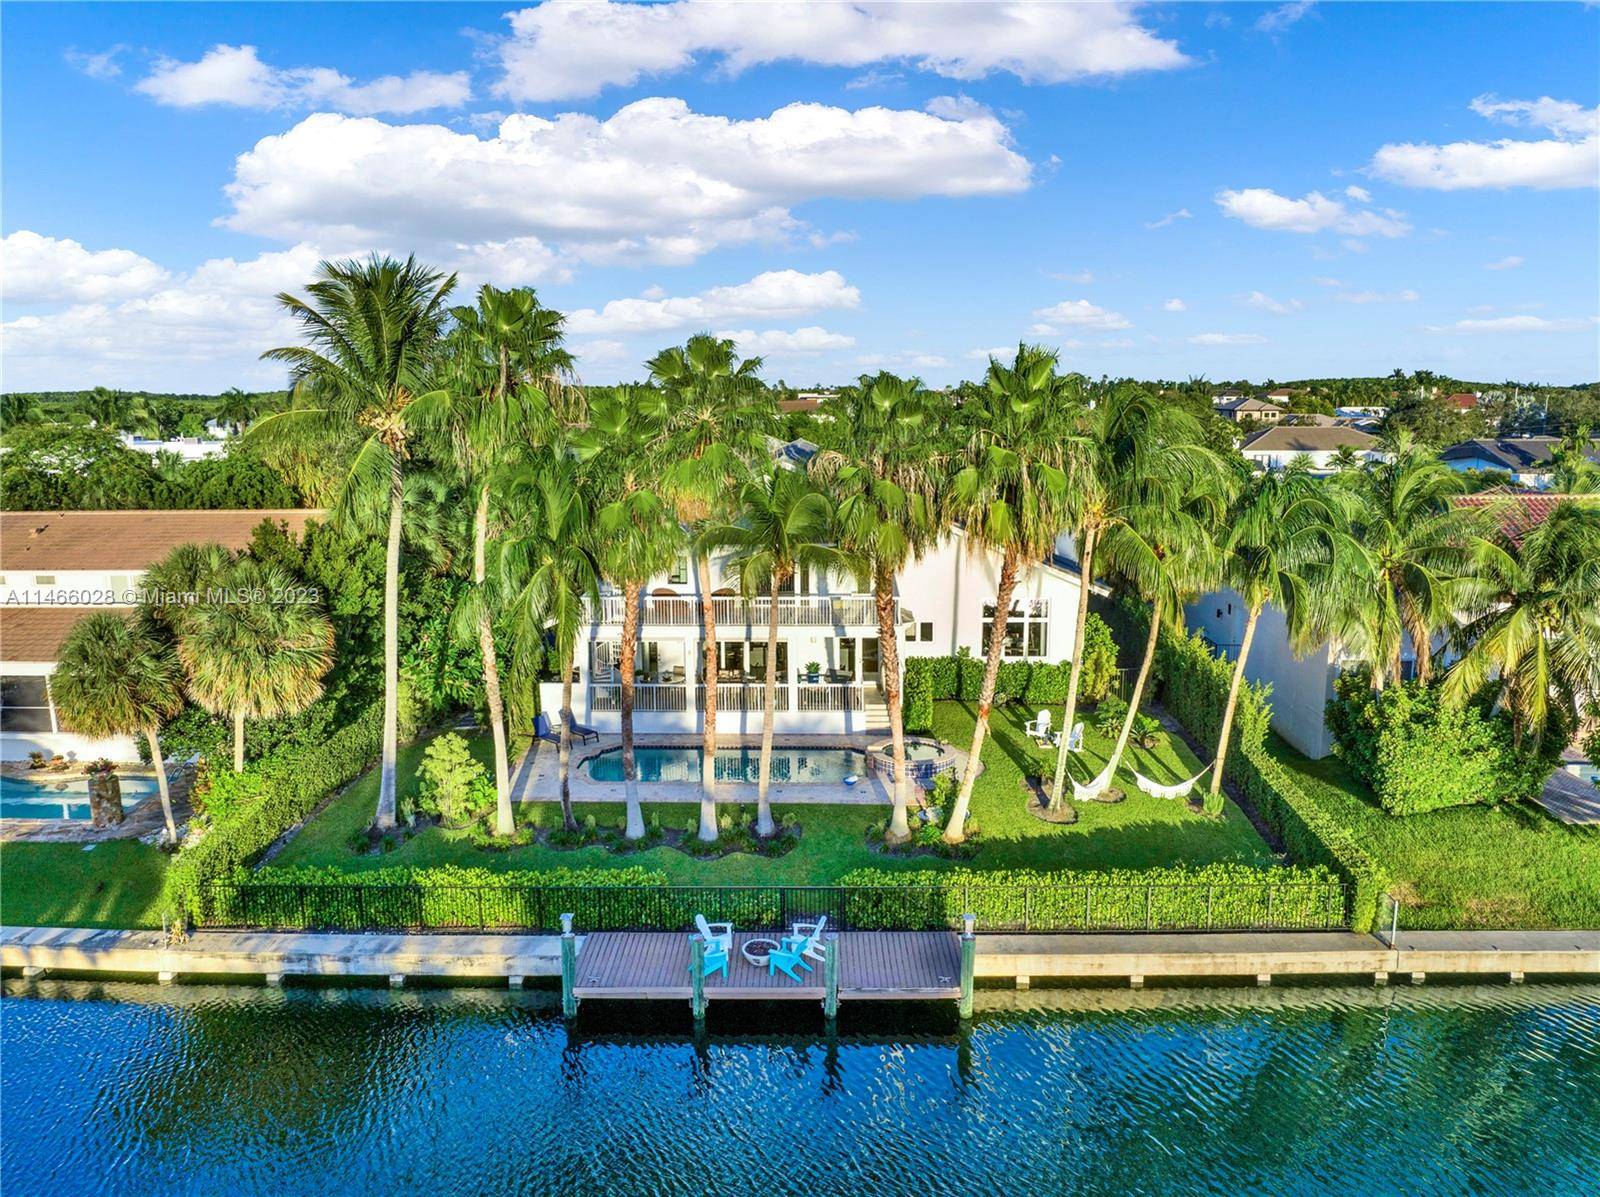 Introducing your waterfront residence, offering resort style living in Gables by the Sea, an exclusive and serene gated community.